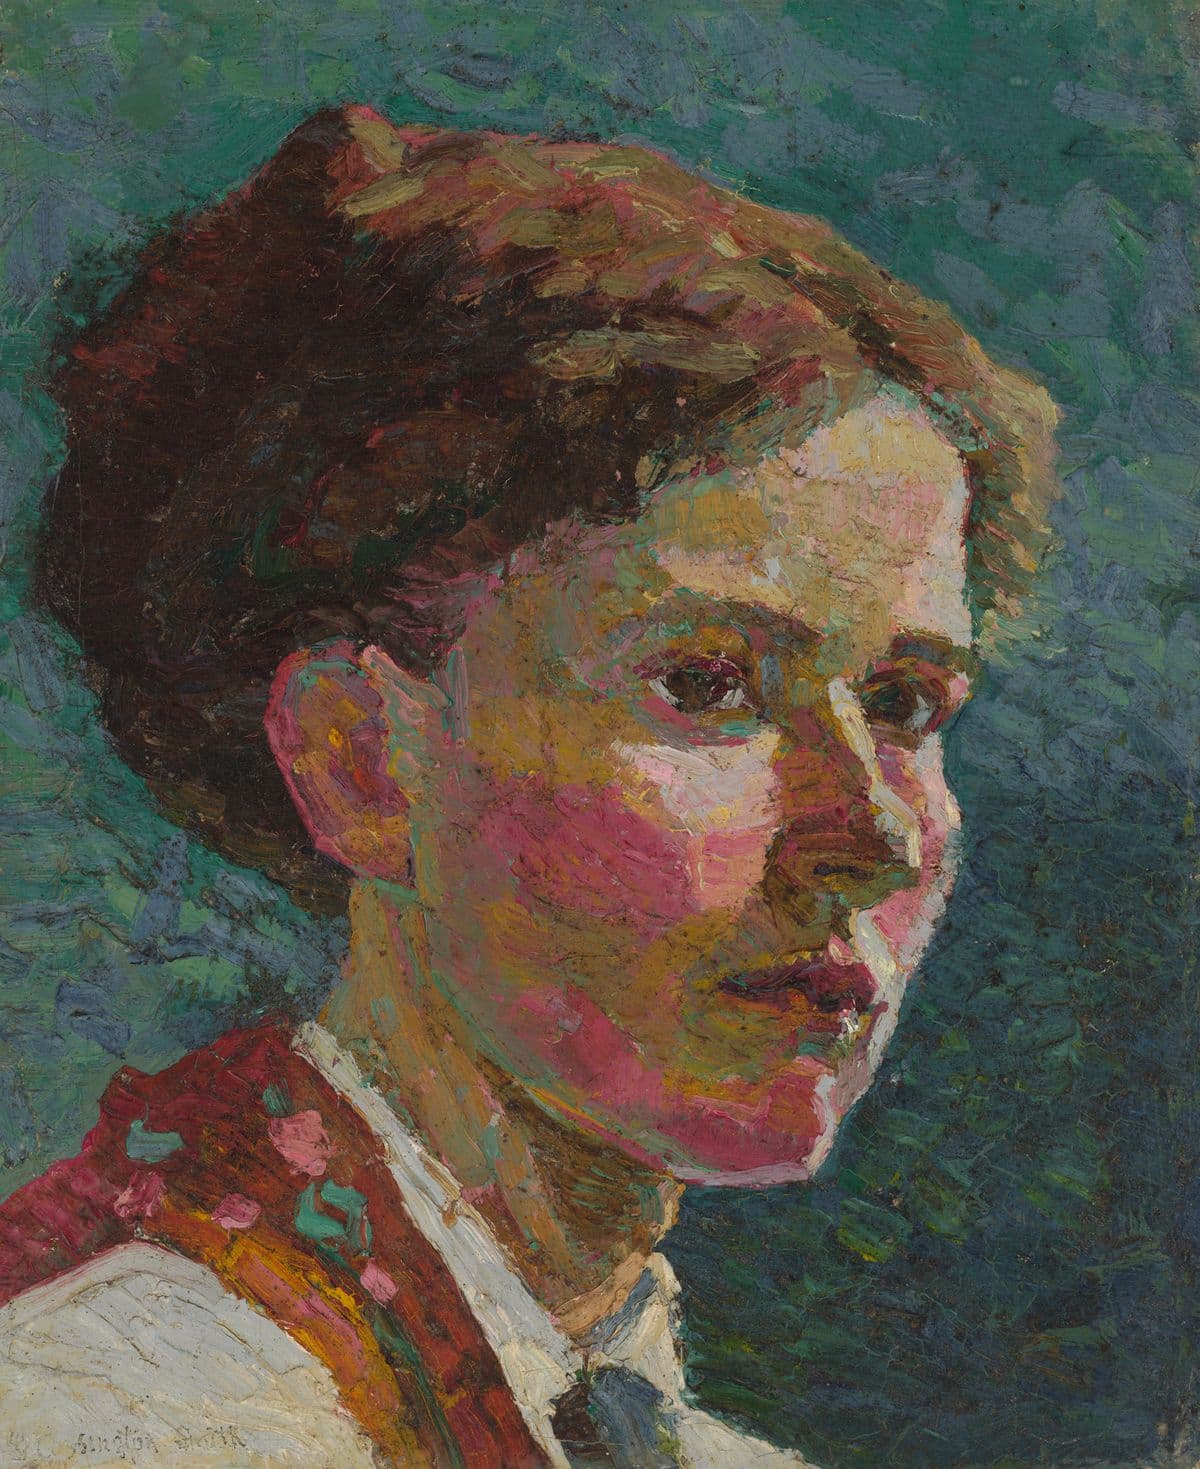 An abstract image of a woman's side profile, she has brown hair and is wearing a decorative garment